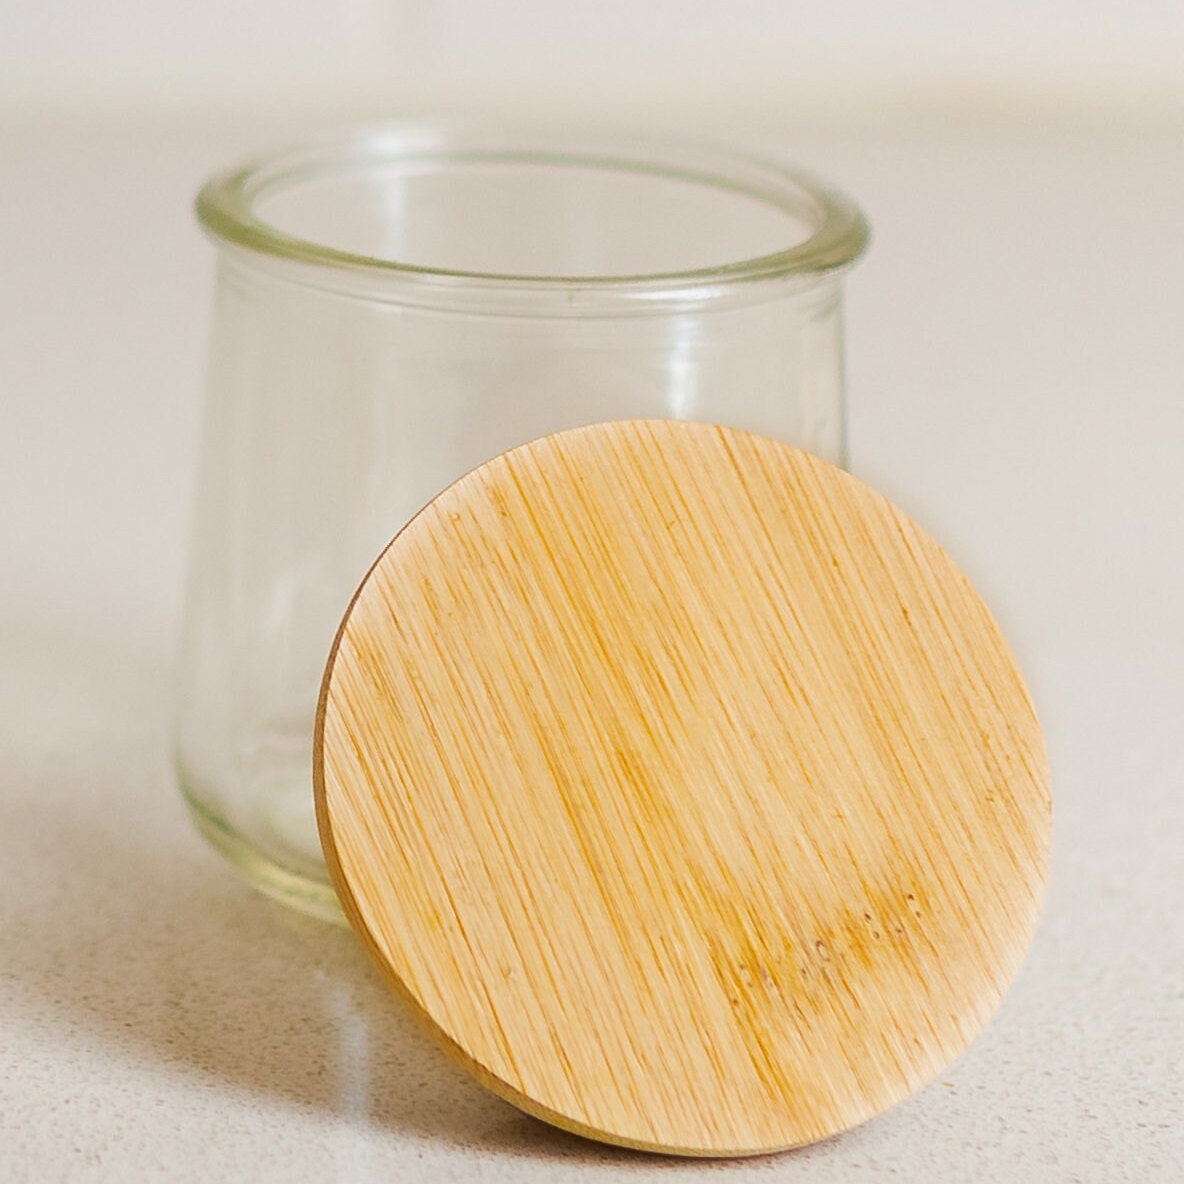 Glass Sublimation Jars Tumblers with Bamboo Lids and Straws (Clear or  Frosted Finish)